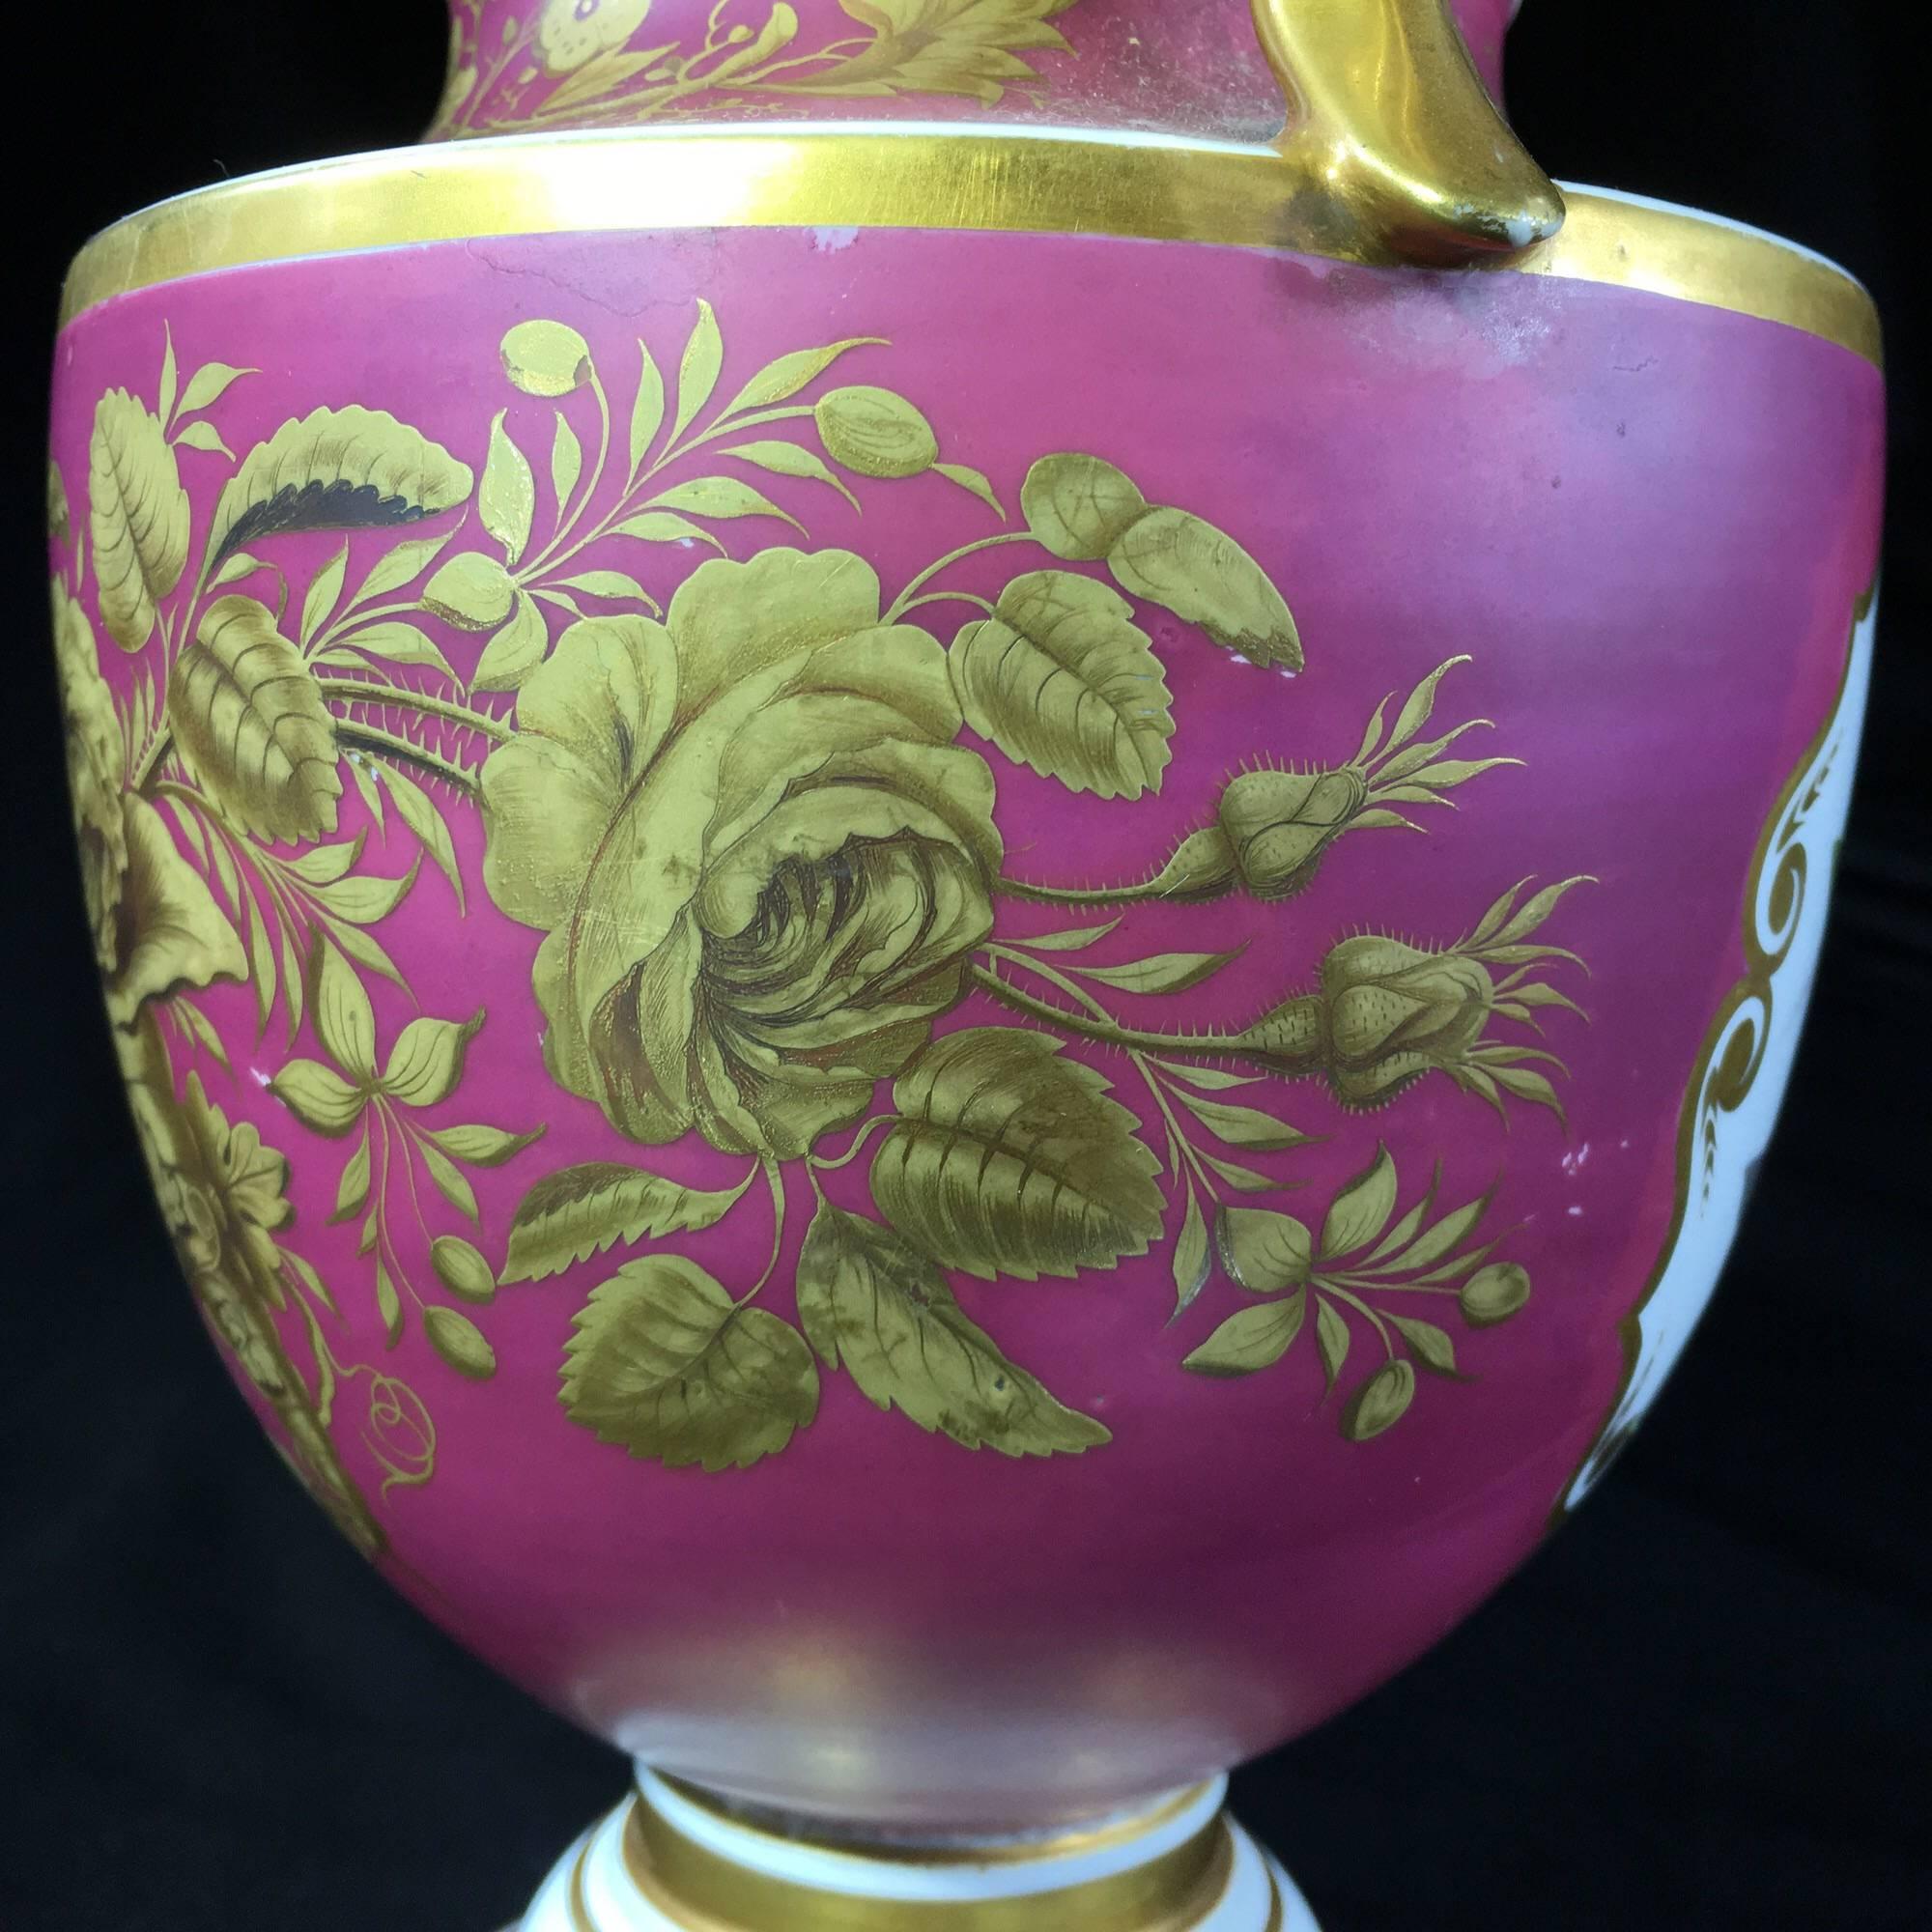 Porcelain Classical Vase with Superb Flower Panels Claret Ground, circa 1825 In Excellent Condition For Sale In Geelong, Victoria